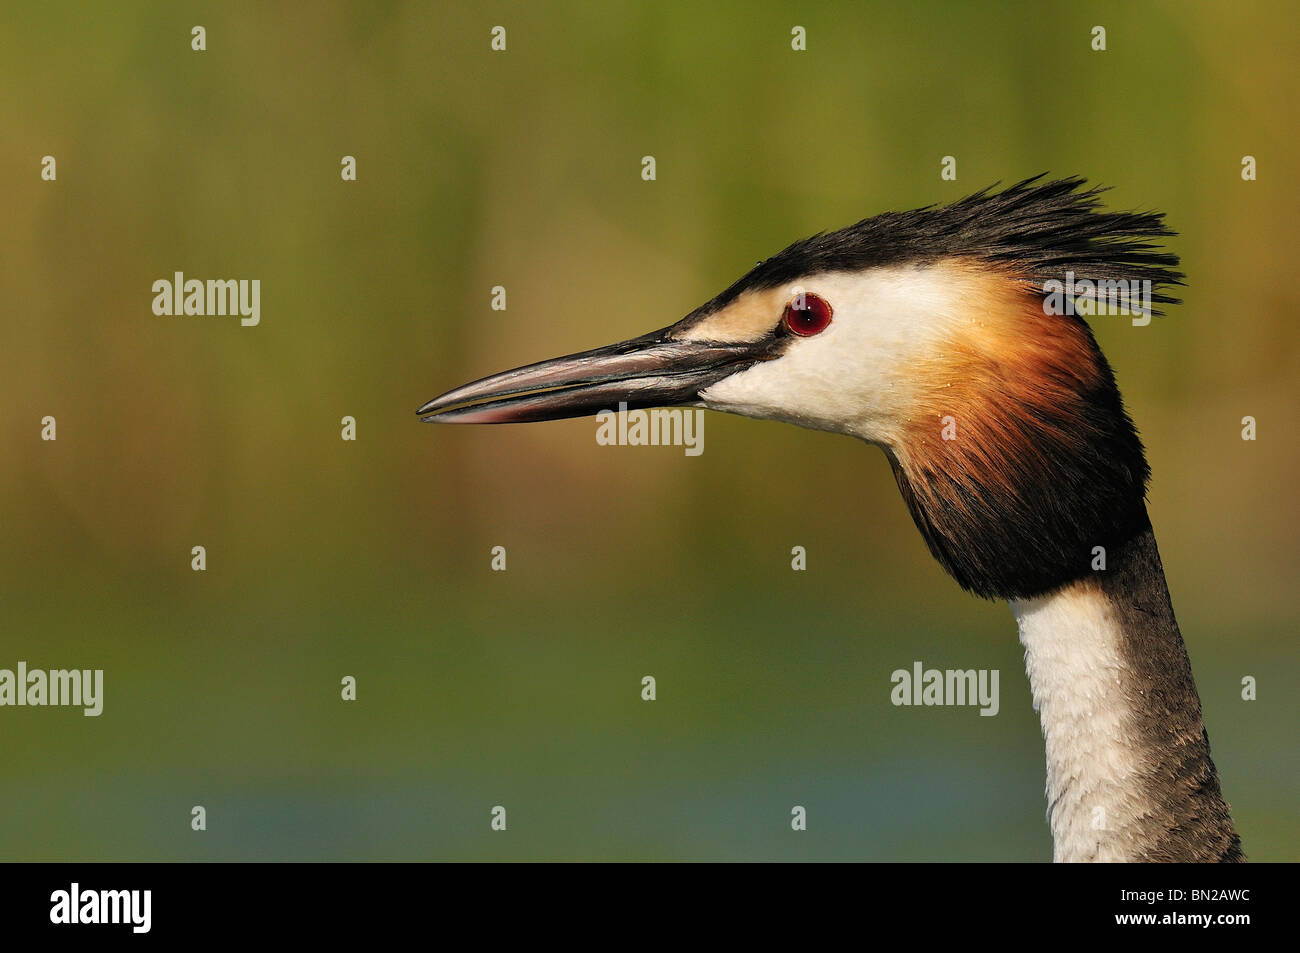 Great Crested Grebe's portrait in the wetland Stock Photo